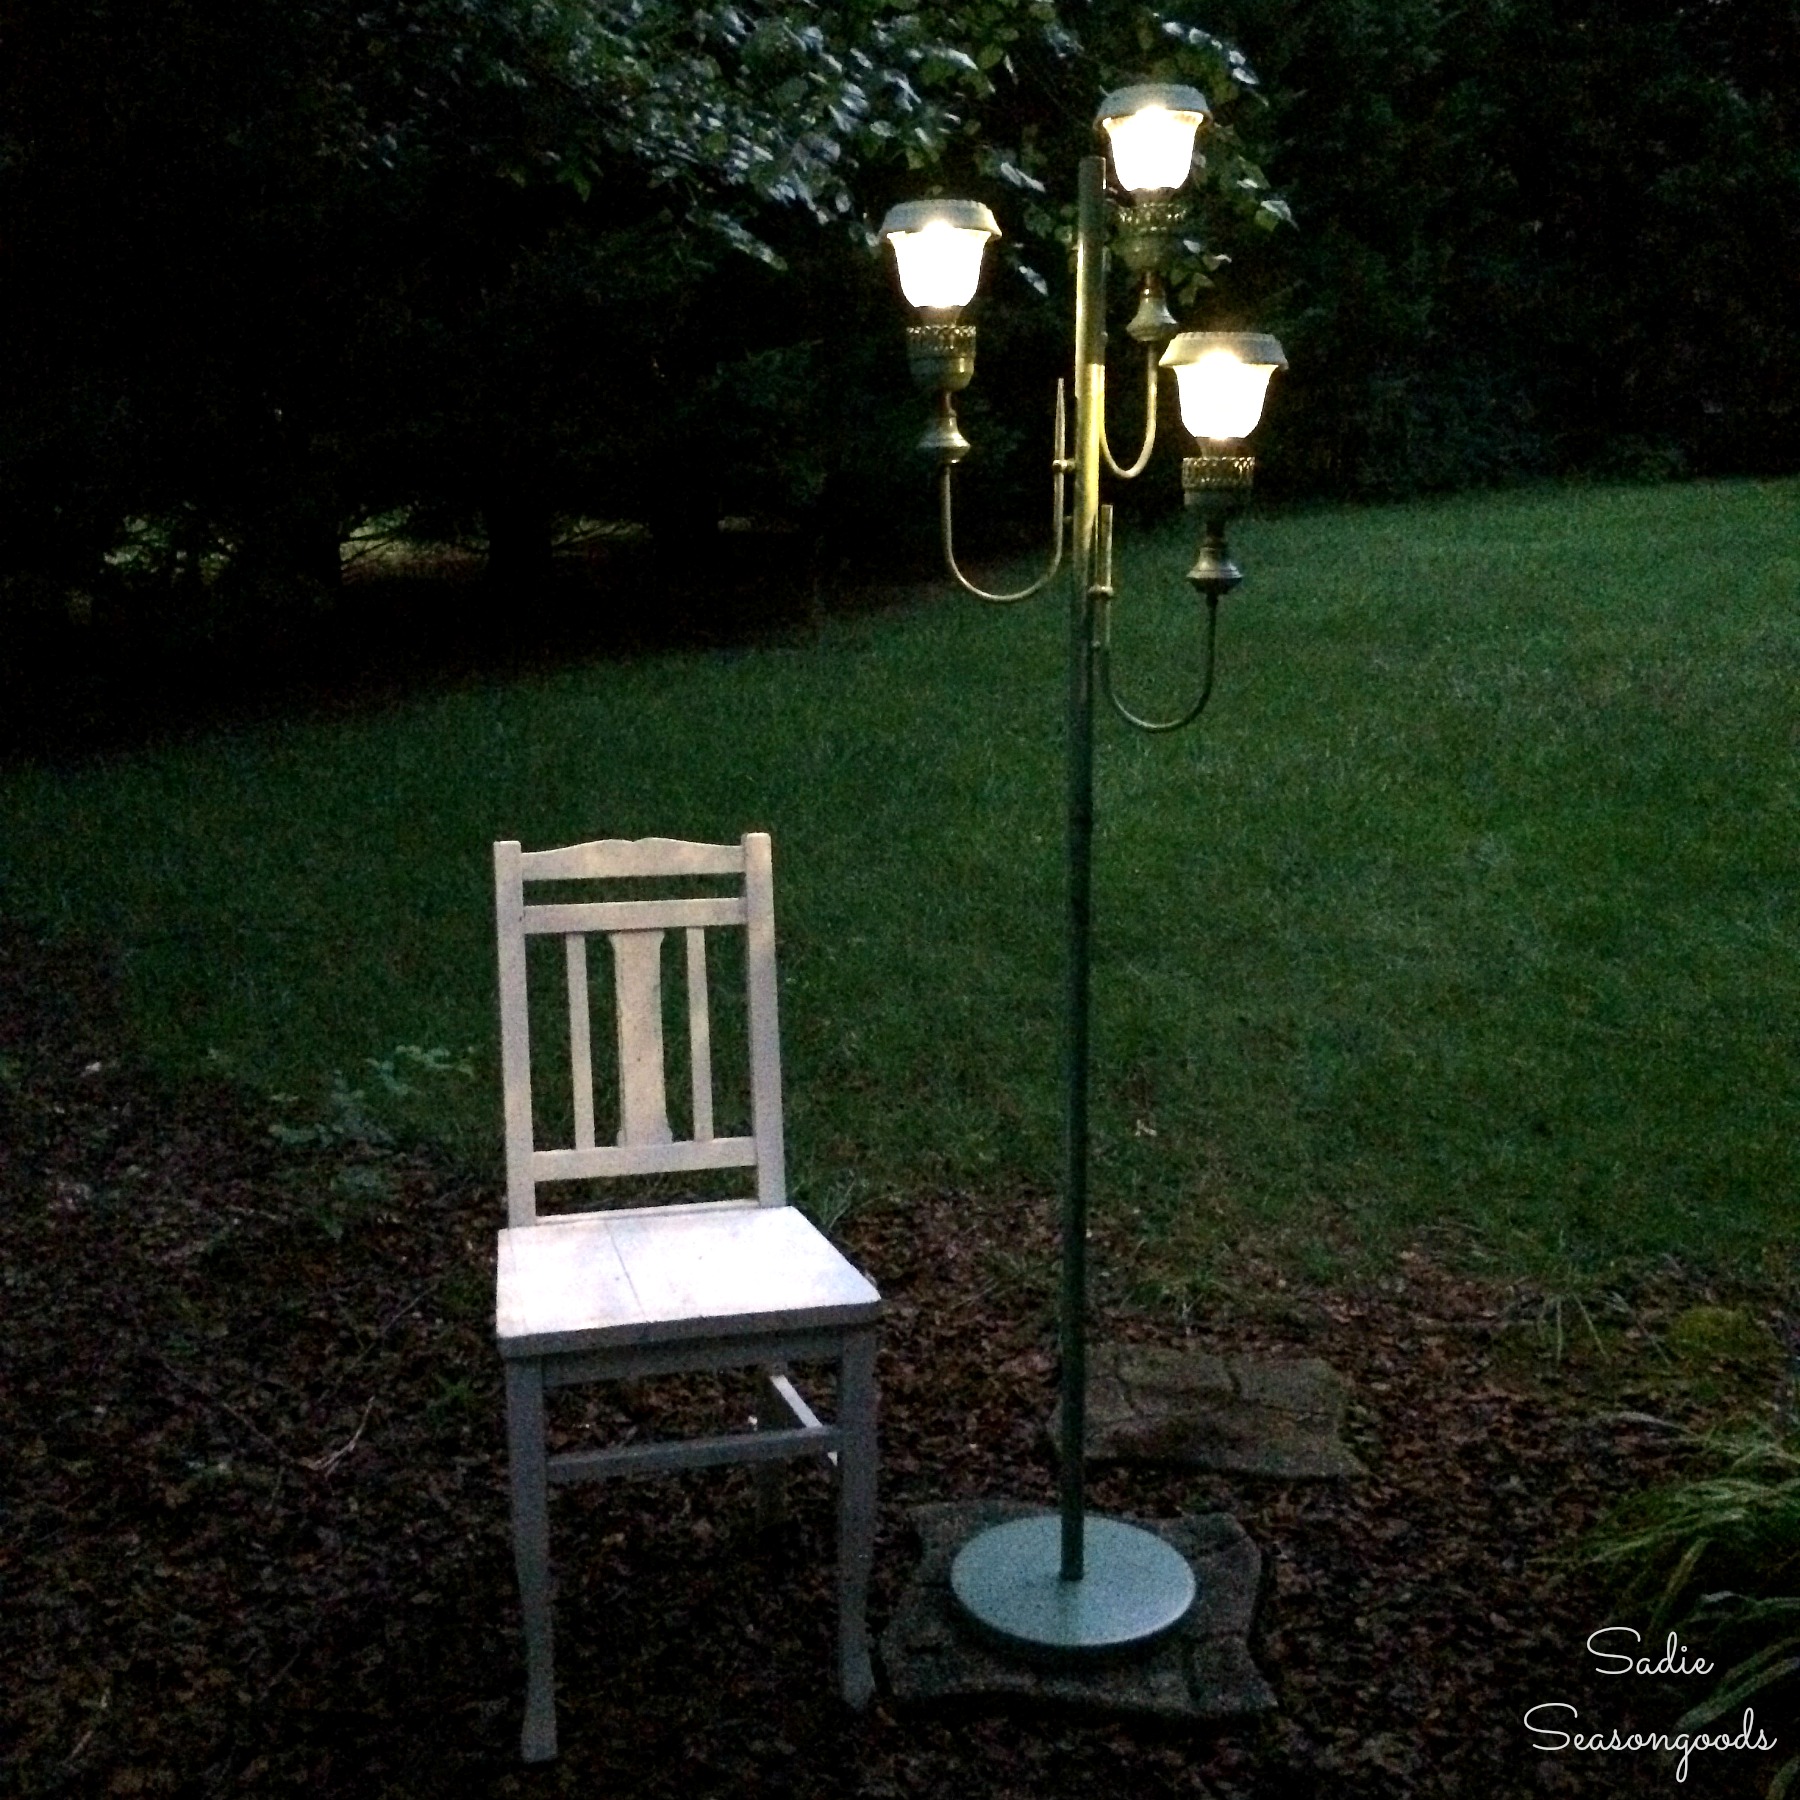 These 10 creative outdoor lighting ideas are sure to spark some inspiration into lighting up your own patio or deck! www.theweatheredfox.net